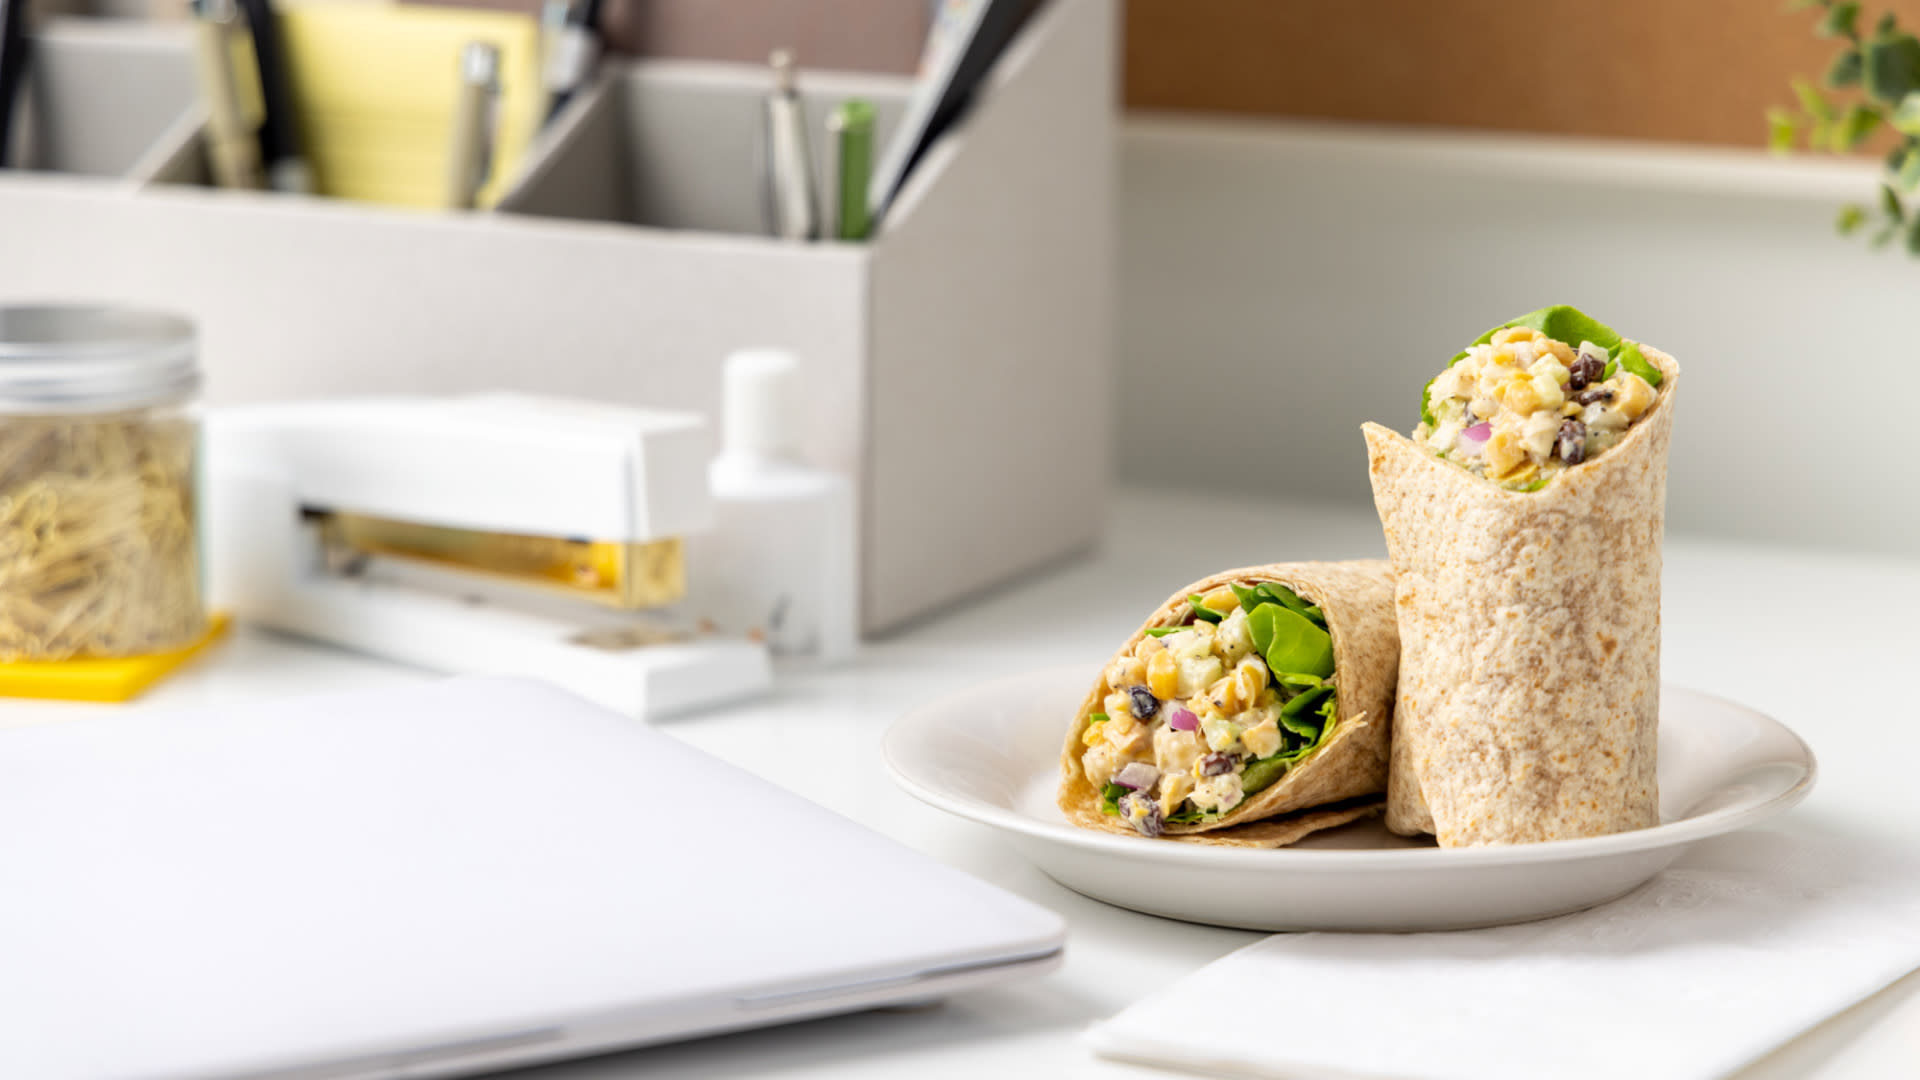 Image of the Napa Chickpea Wrap